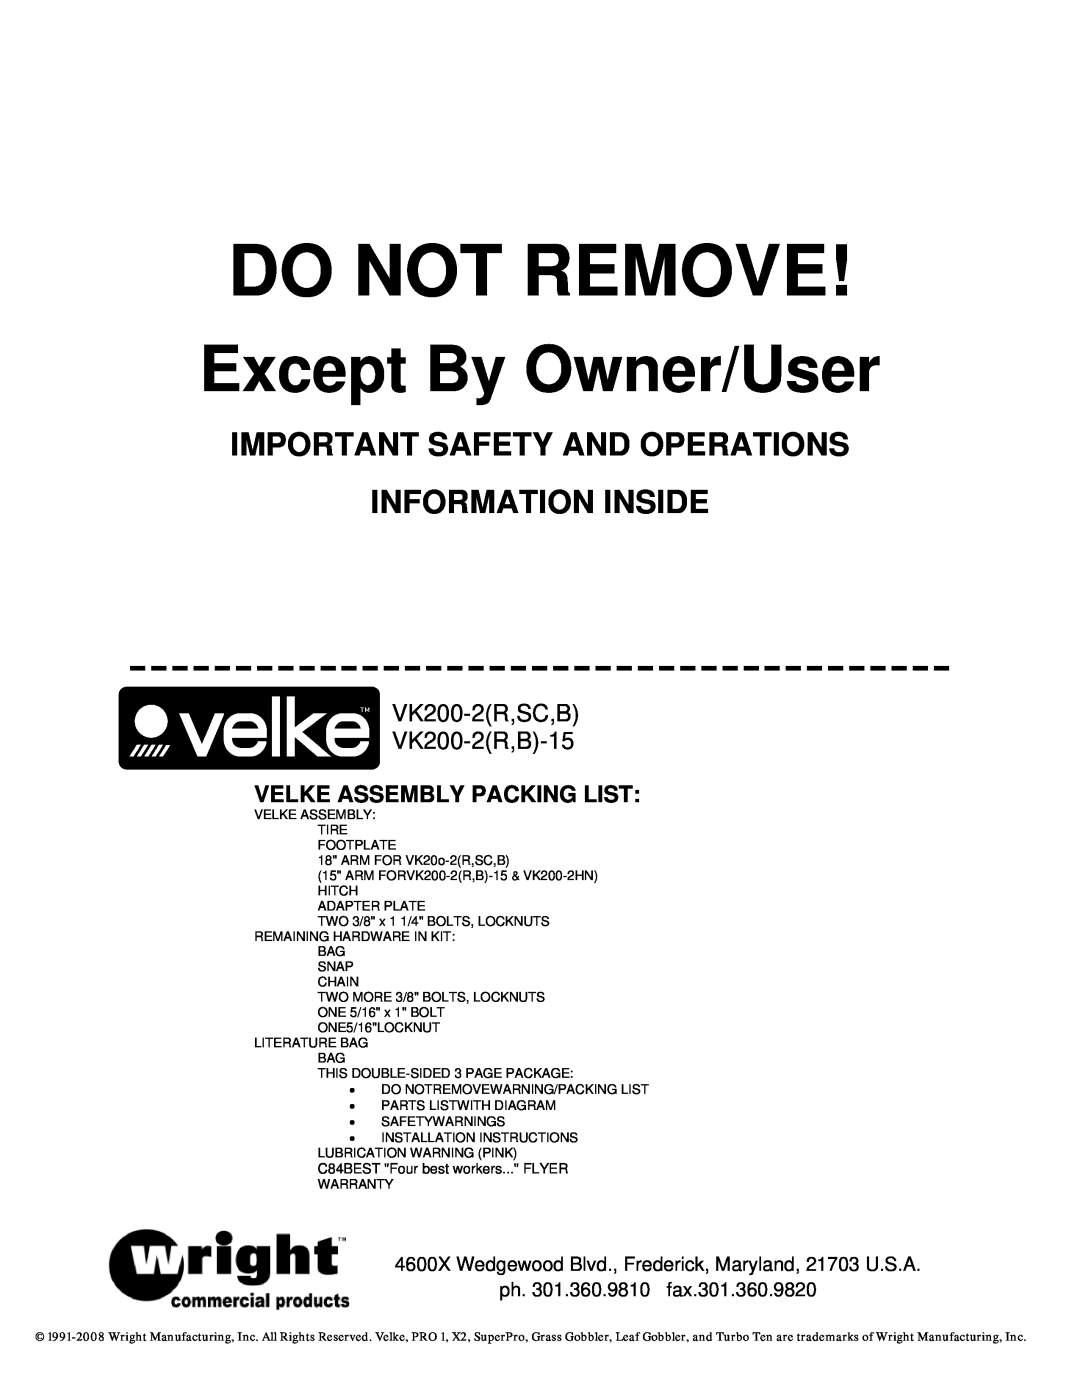 Wright Manufacturing SC, B) installation instructions Do Not Remove, Except By Owner/User, Important Safety And Operations 